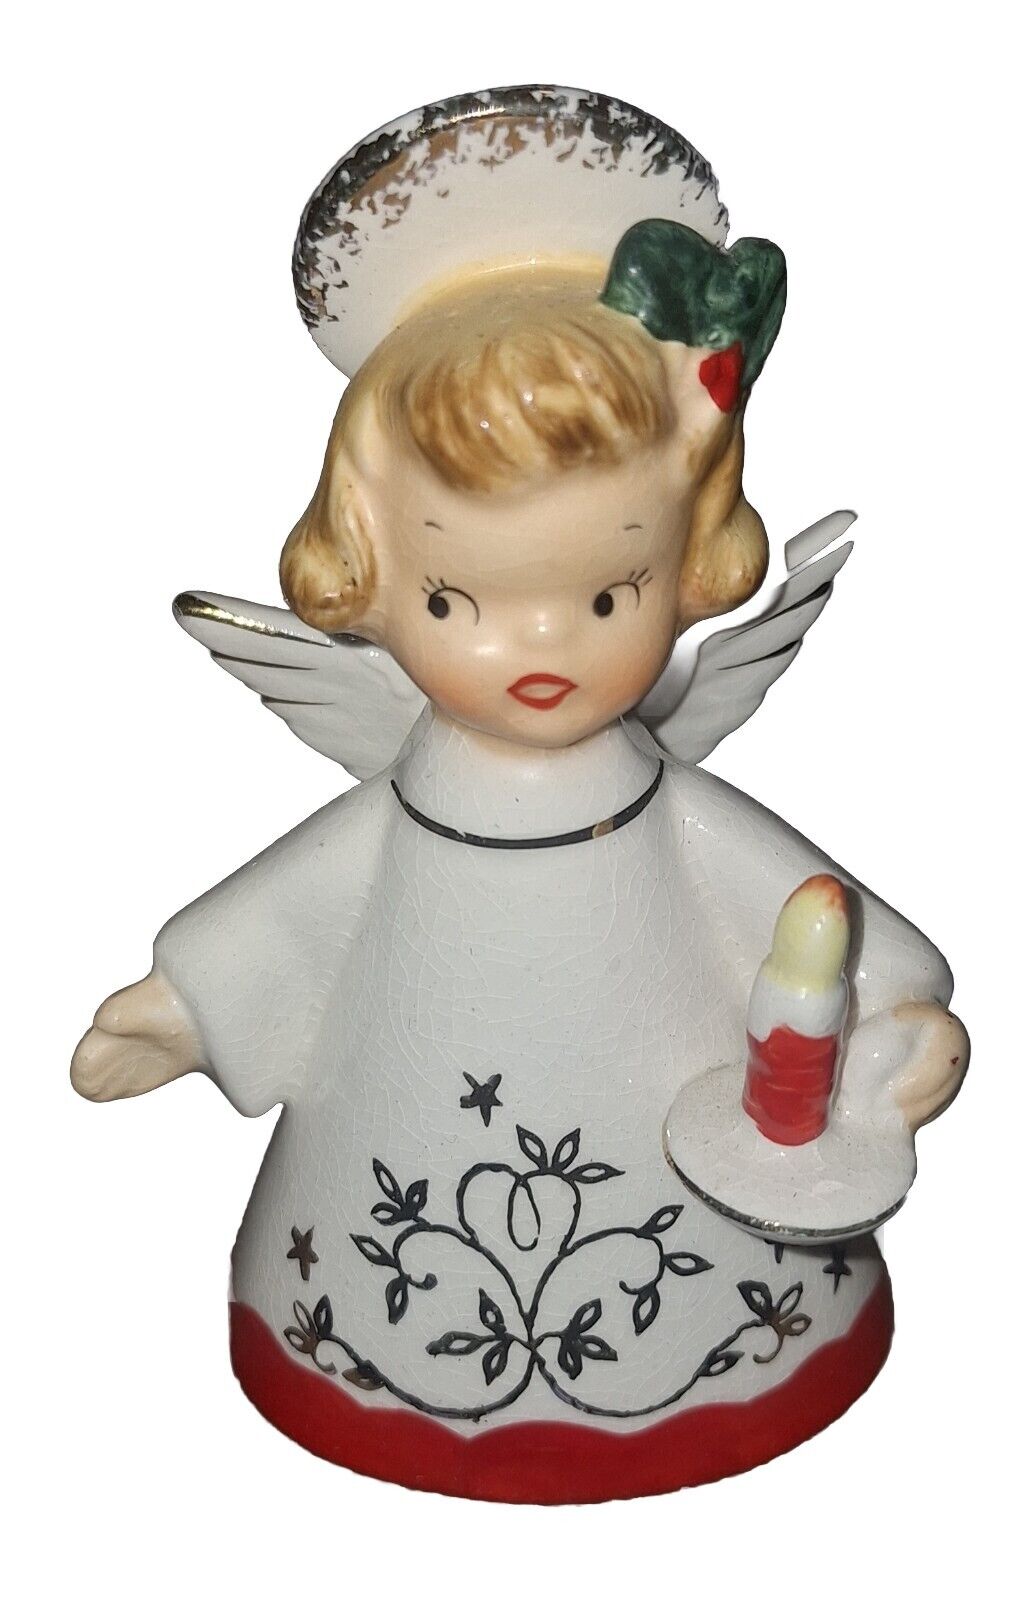 Vintage Napco Christmas Angel Bell Holding Candle Japan National Potteries